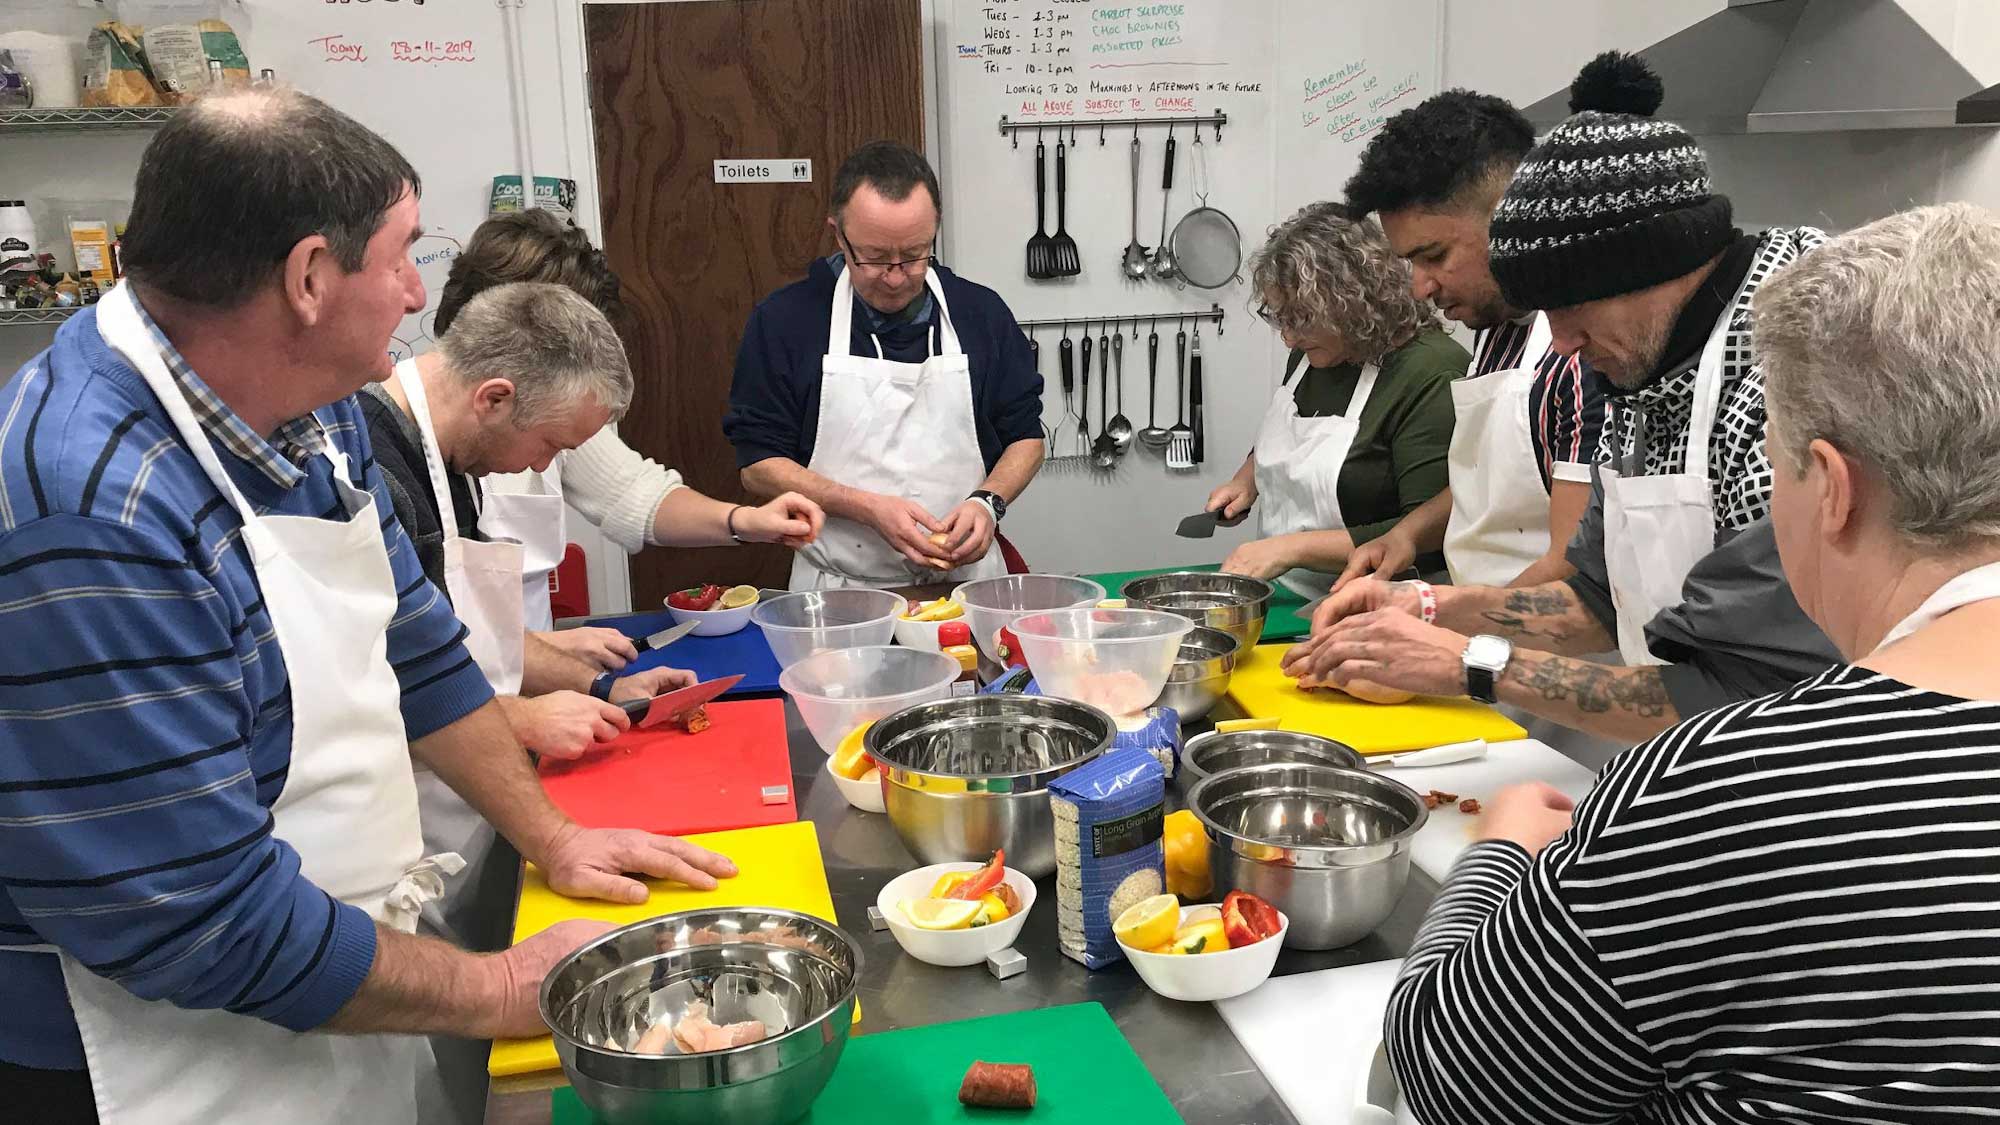 group of people cooking together